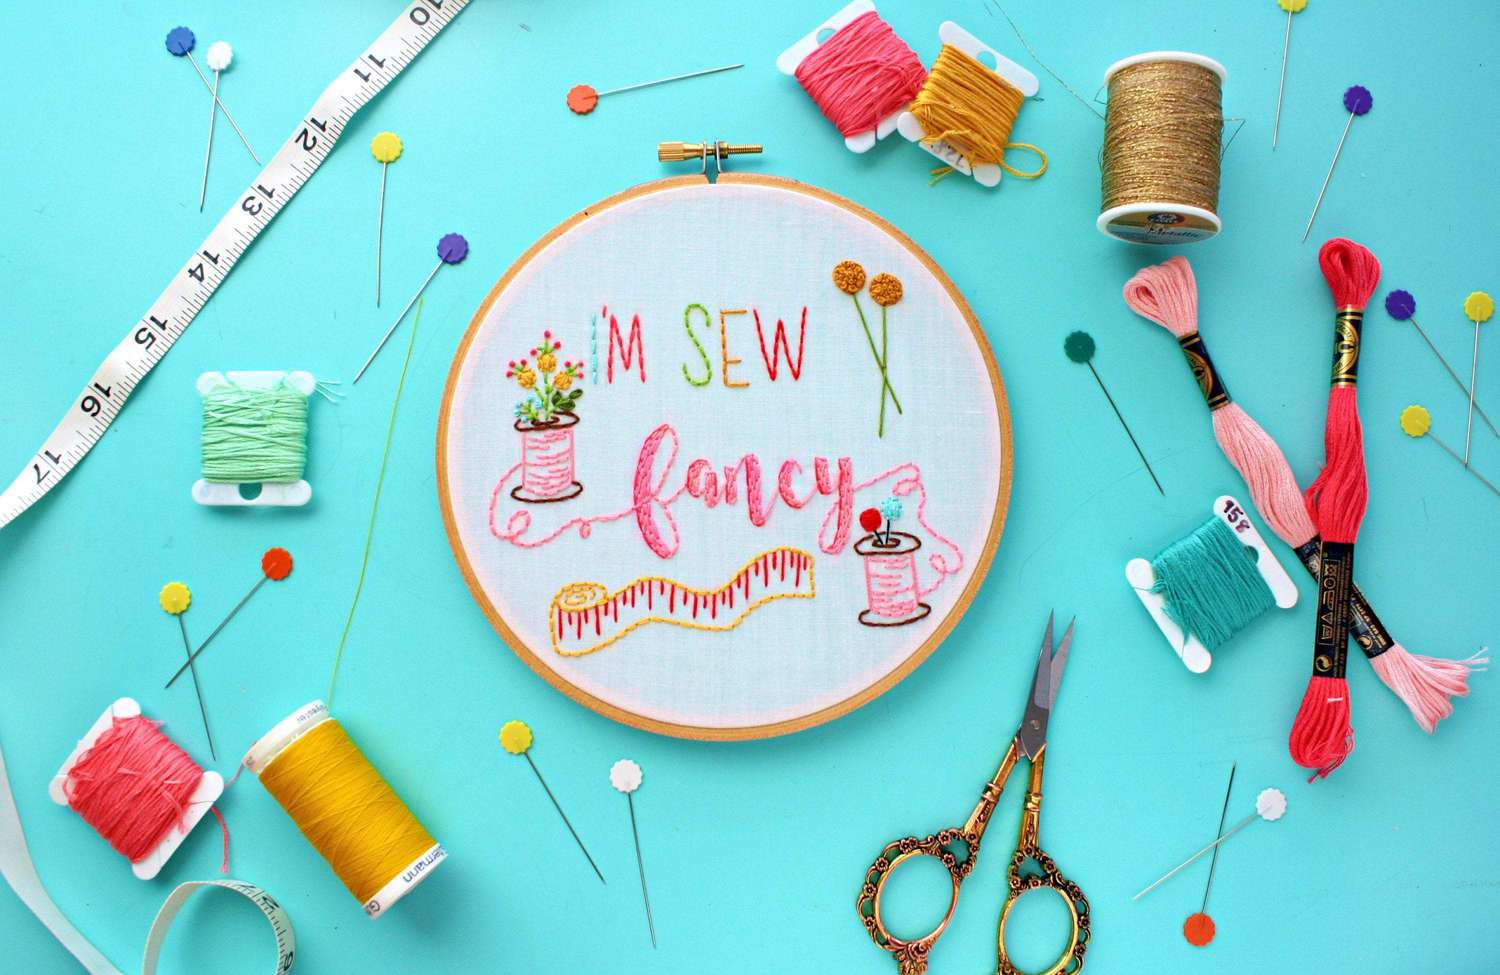 I'm Sew Fancy Hand Embroidery Pattern